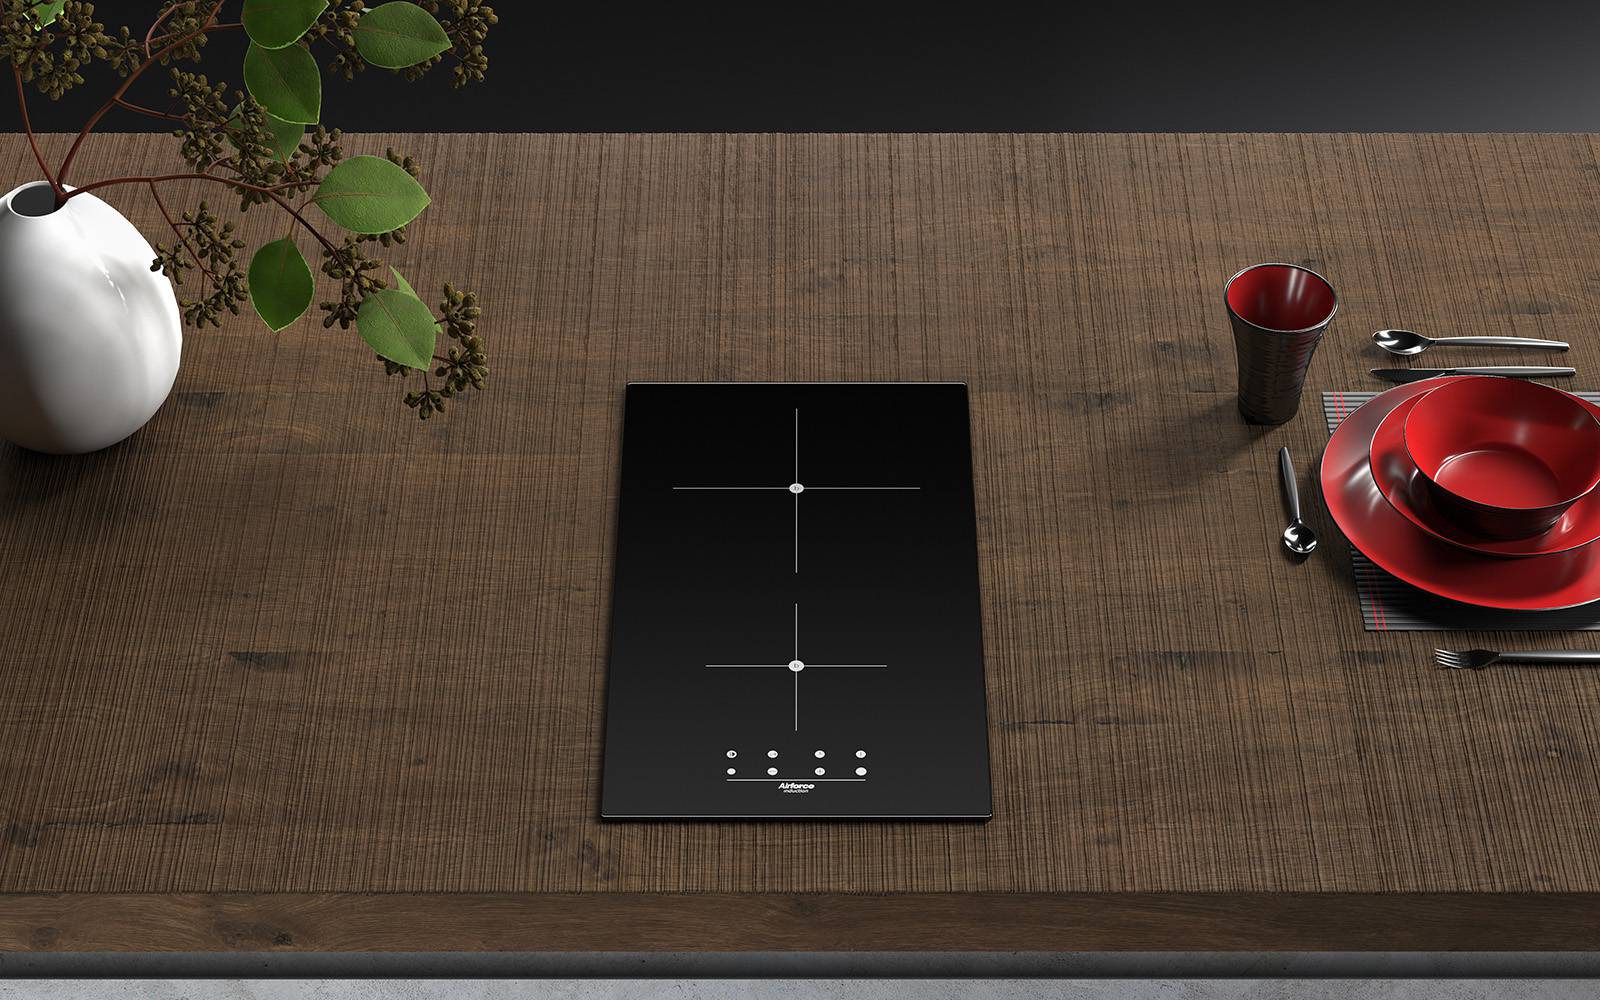 Airforce Pop 30cm Domino Induction Hob 2 Zone with Touch Control with Built in Integra System